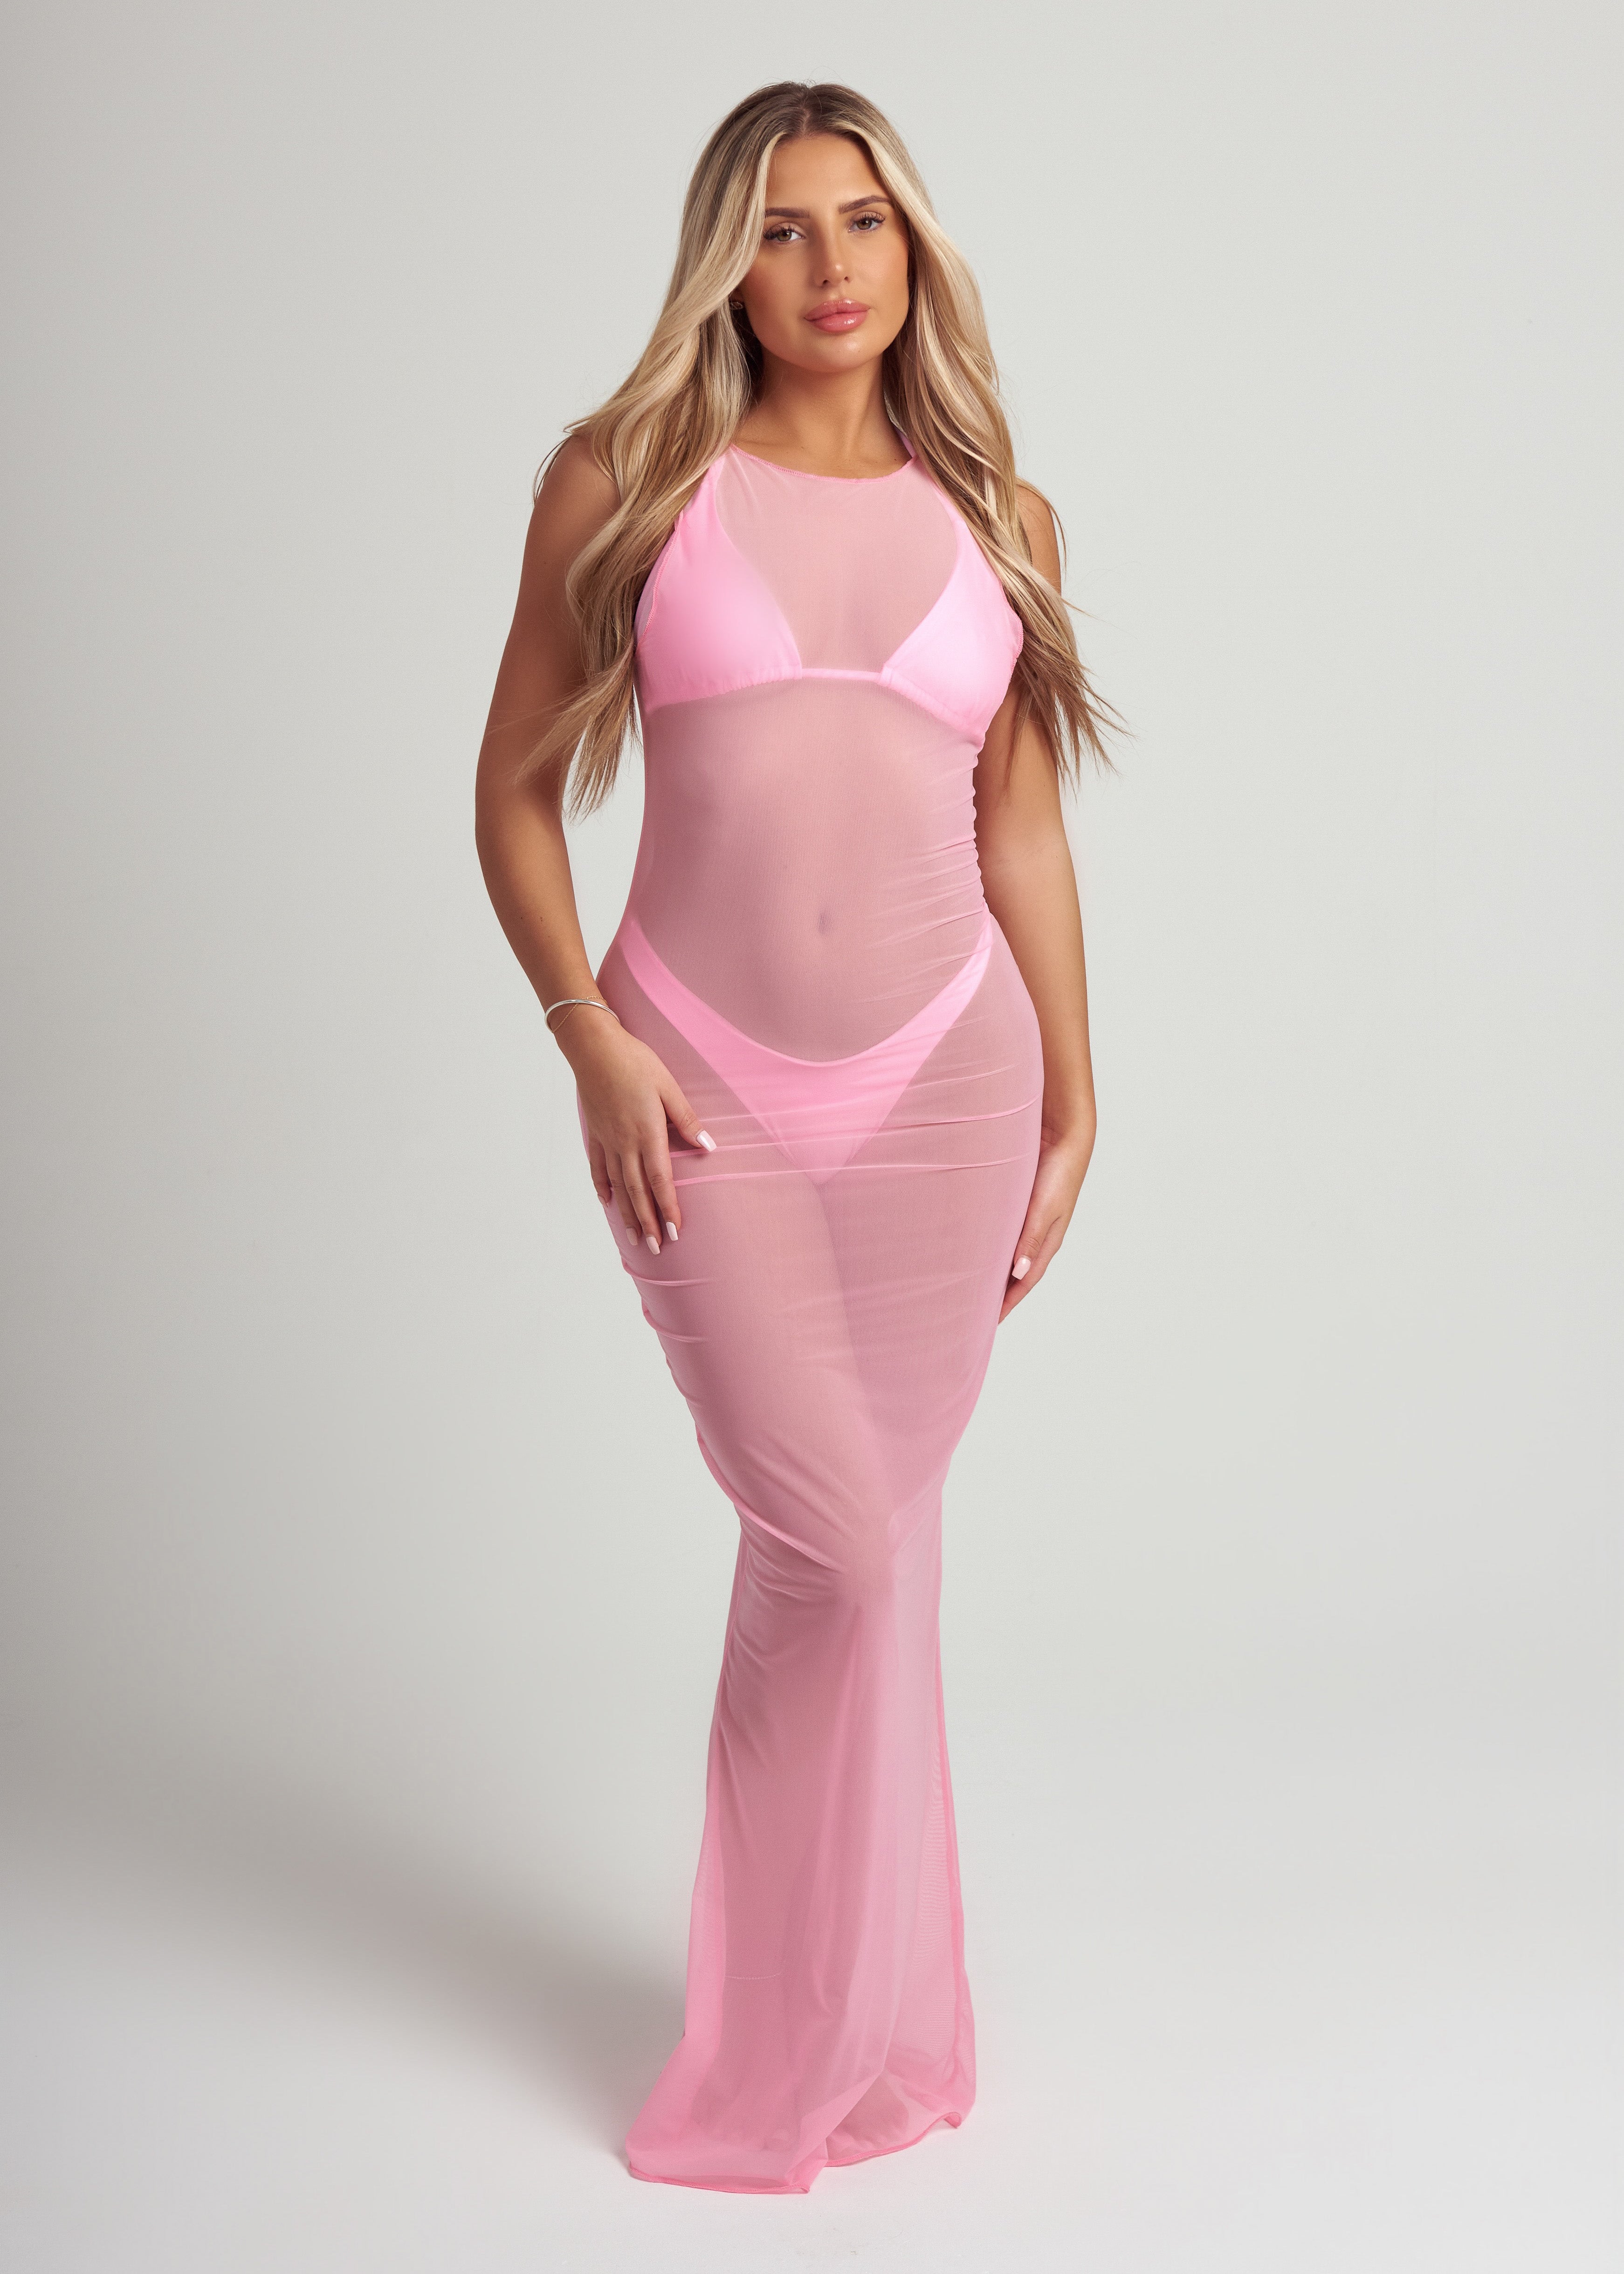 Mesh Maxi Dress in Baby Pink